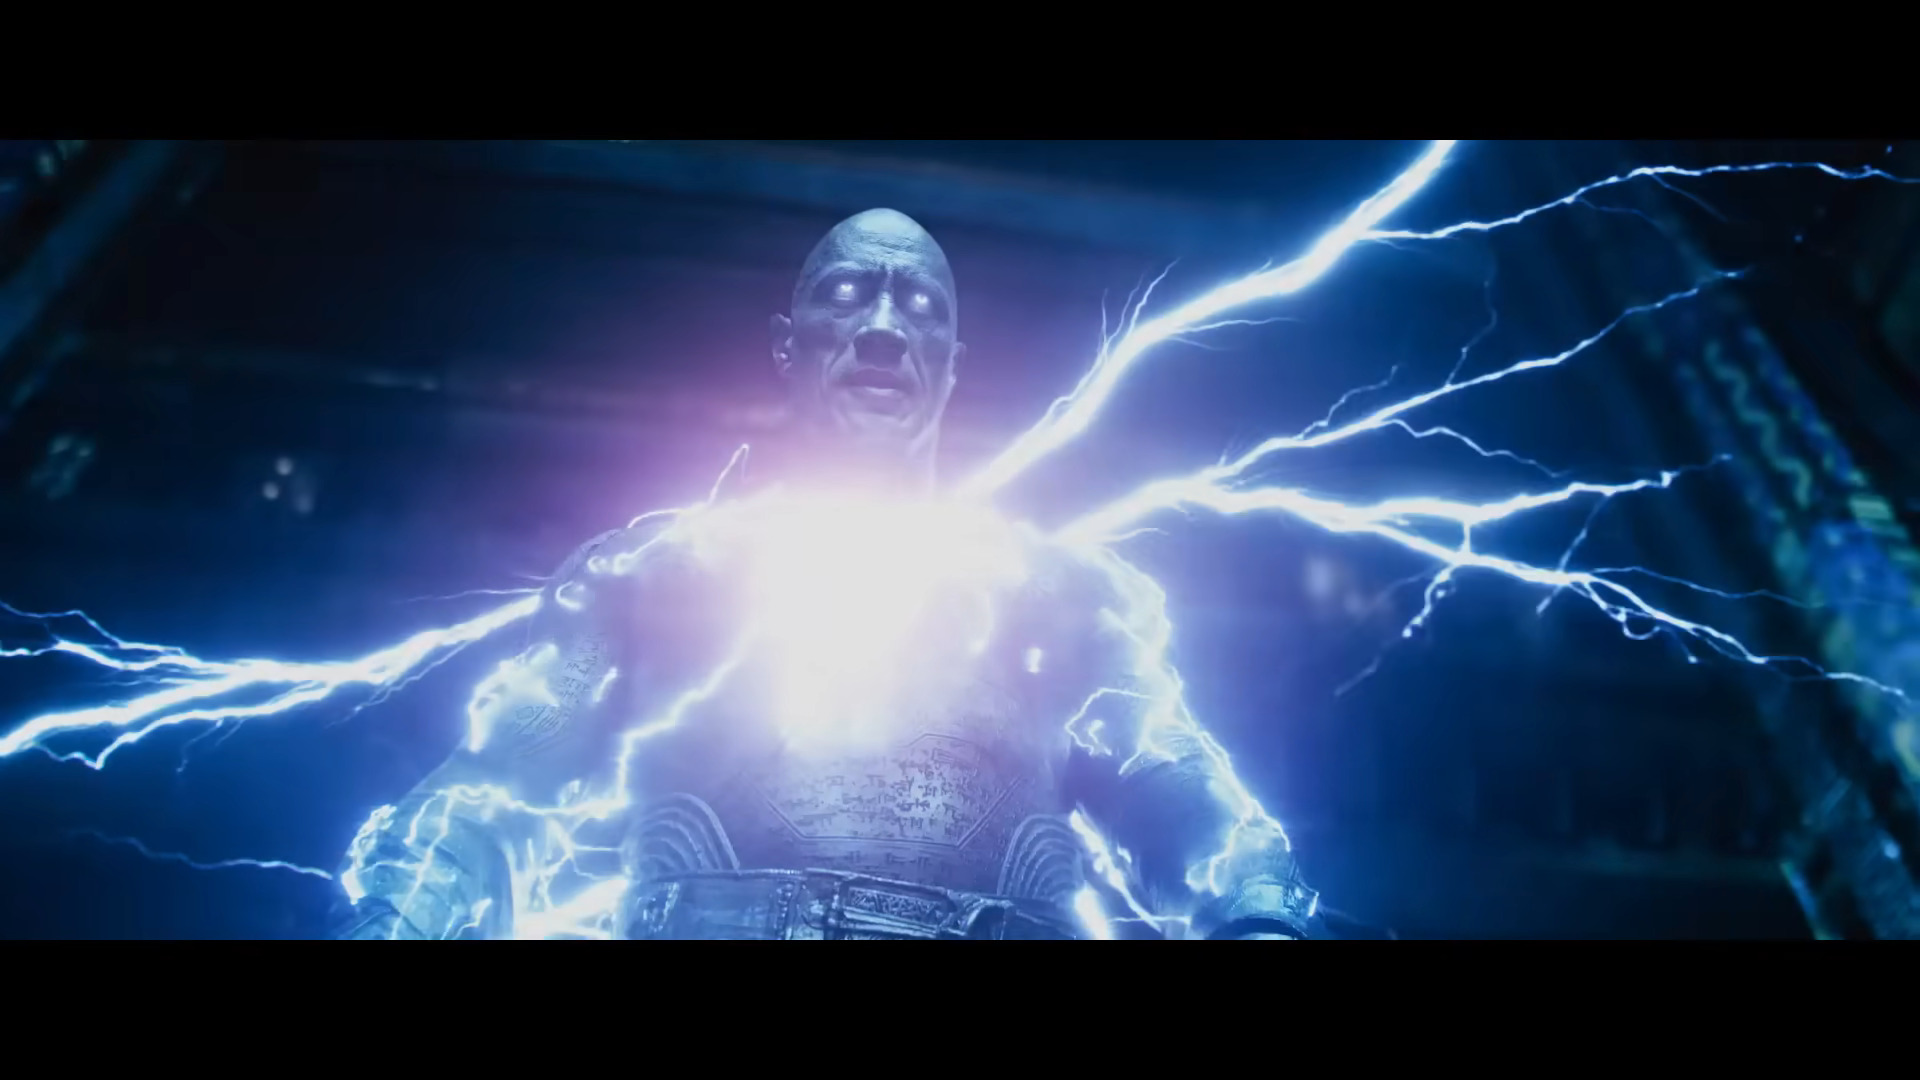 Black Adam (Dwayne Johnson) surges with his newly acquired powers in Black Adam (2022), Warner Bros. Pictures